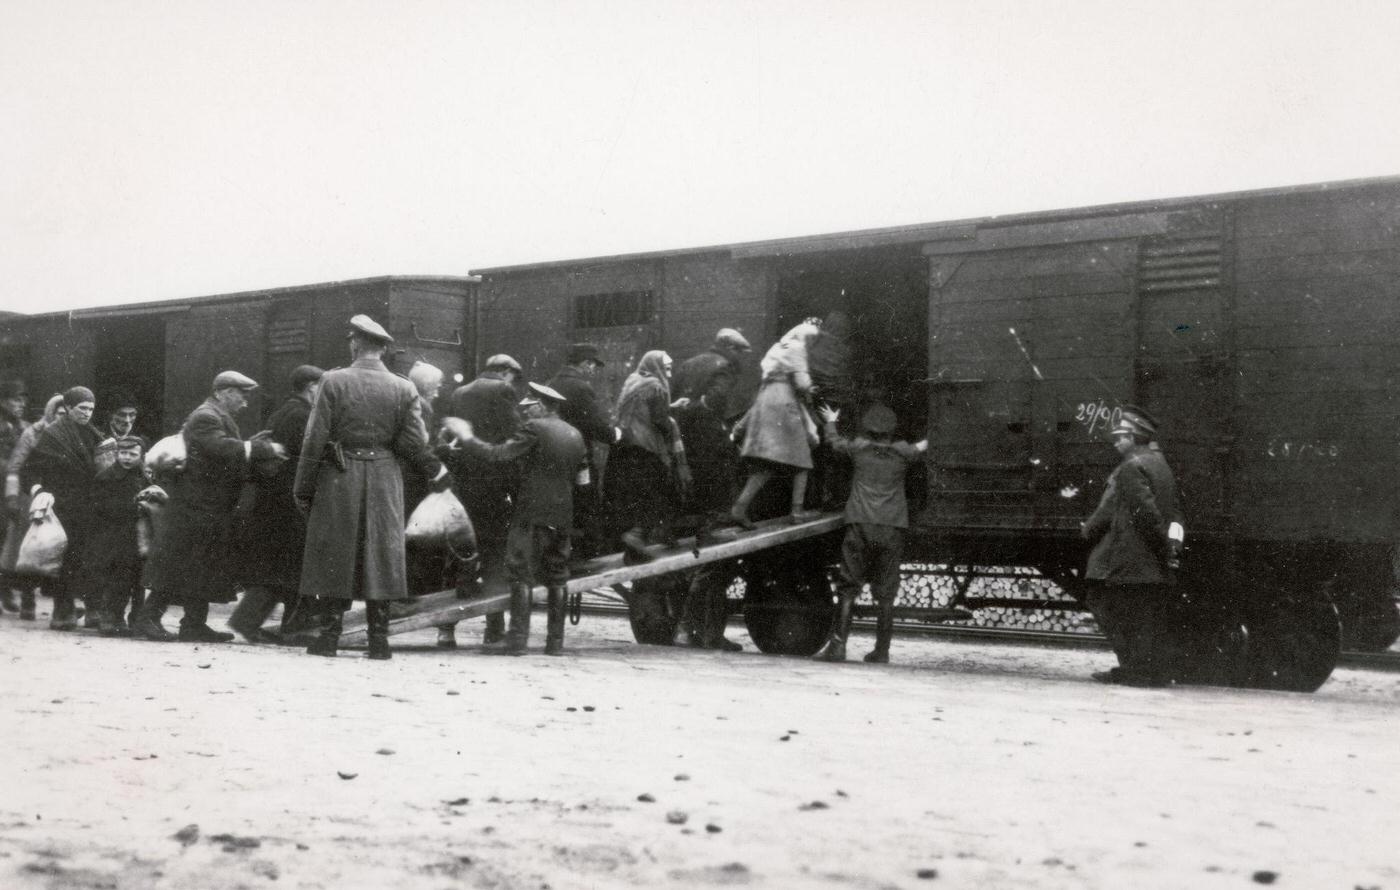 This photograph shows Polish Jews being deported in cattle carriages from a "reloading point" in Warsaw.